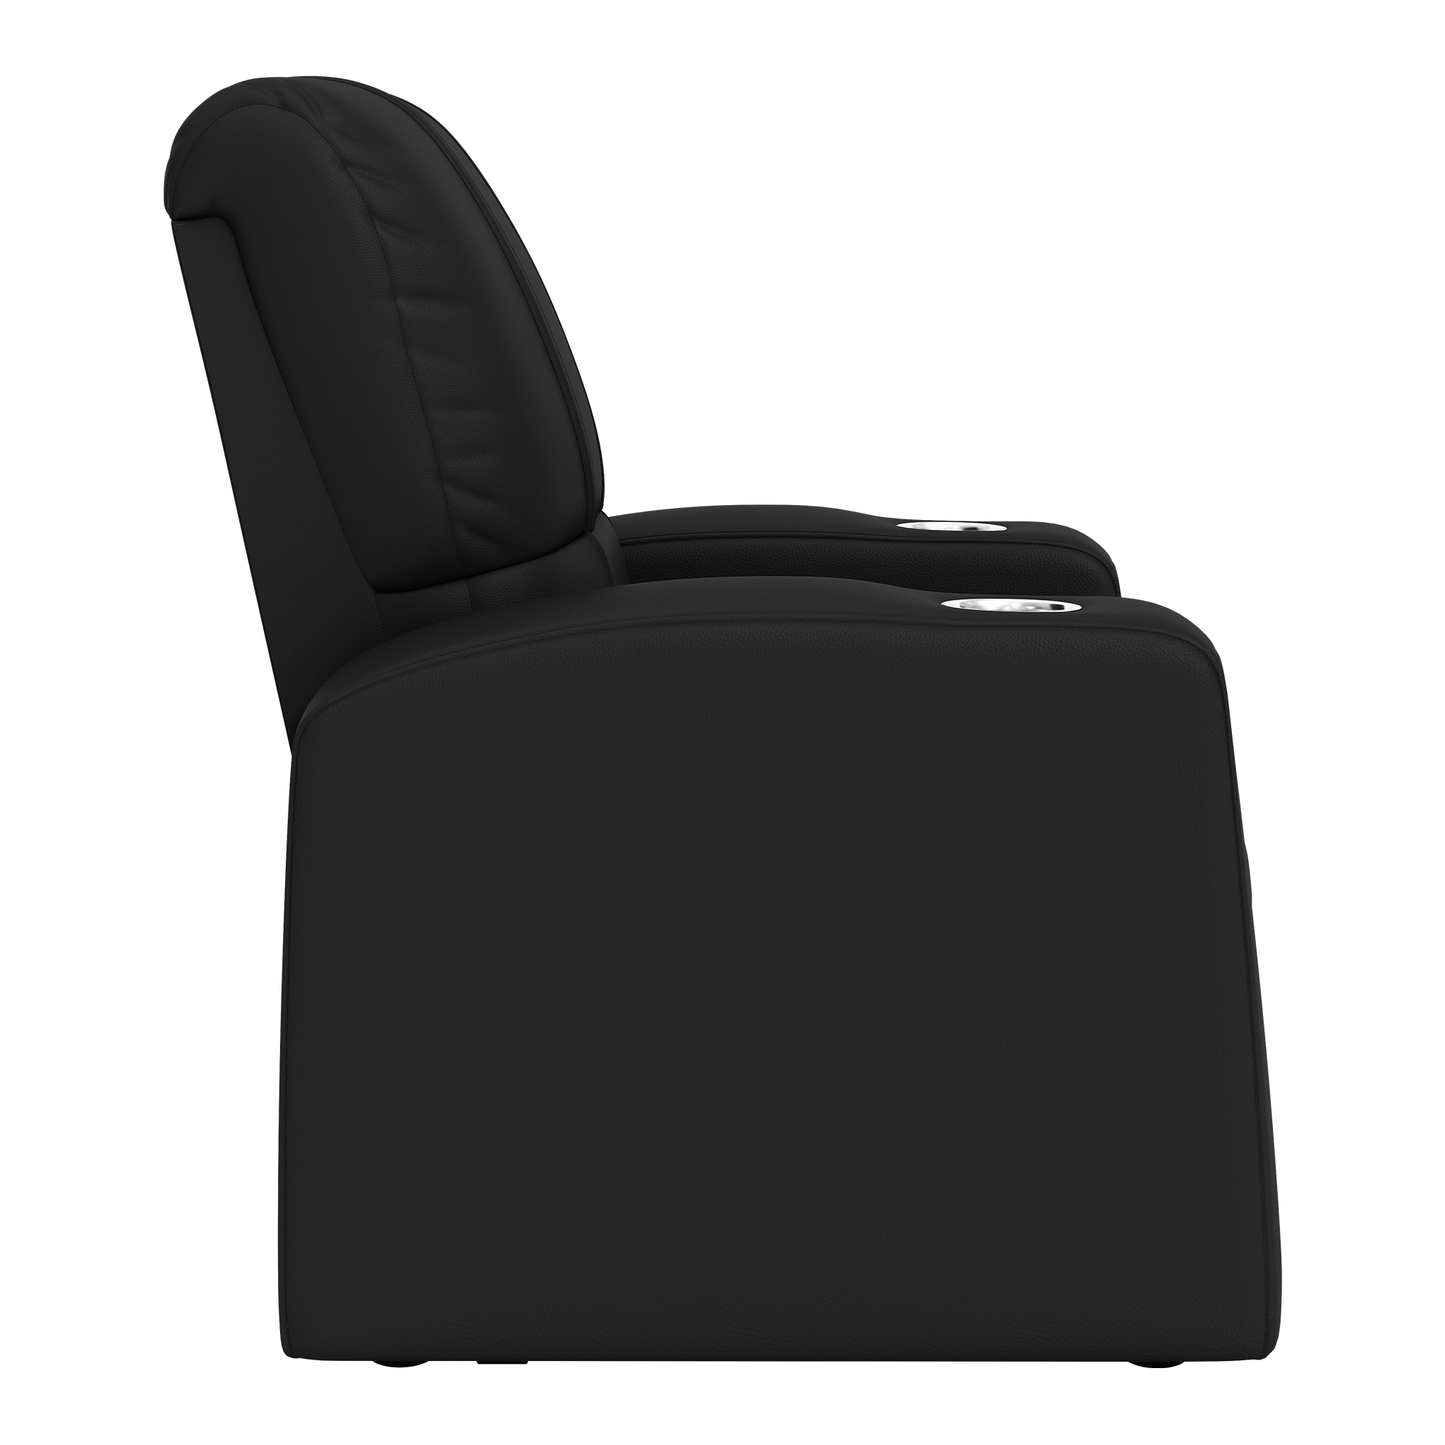 Relax Home Theater Recliner with Inter Miami FC Alternate Logo